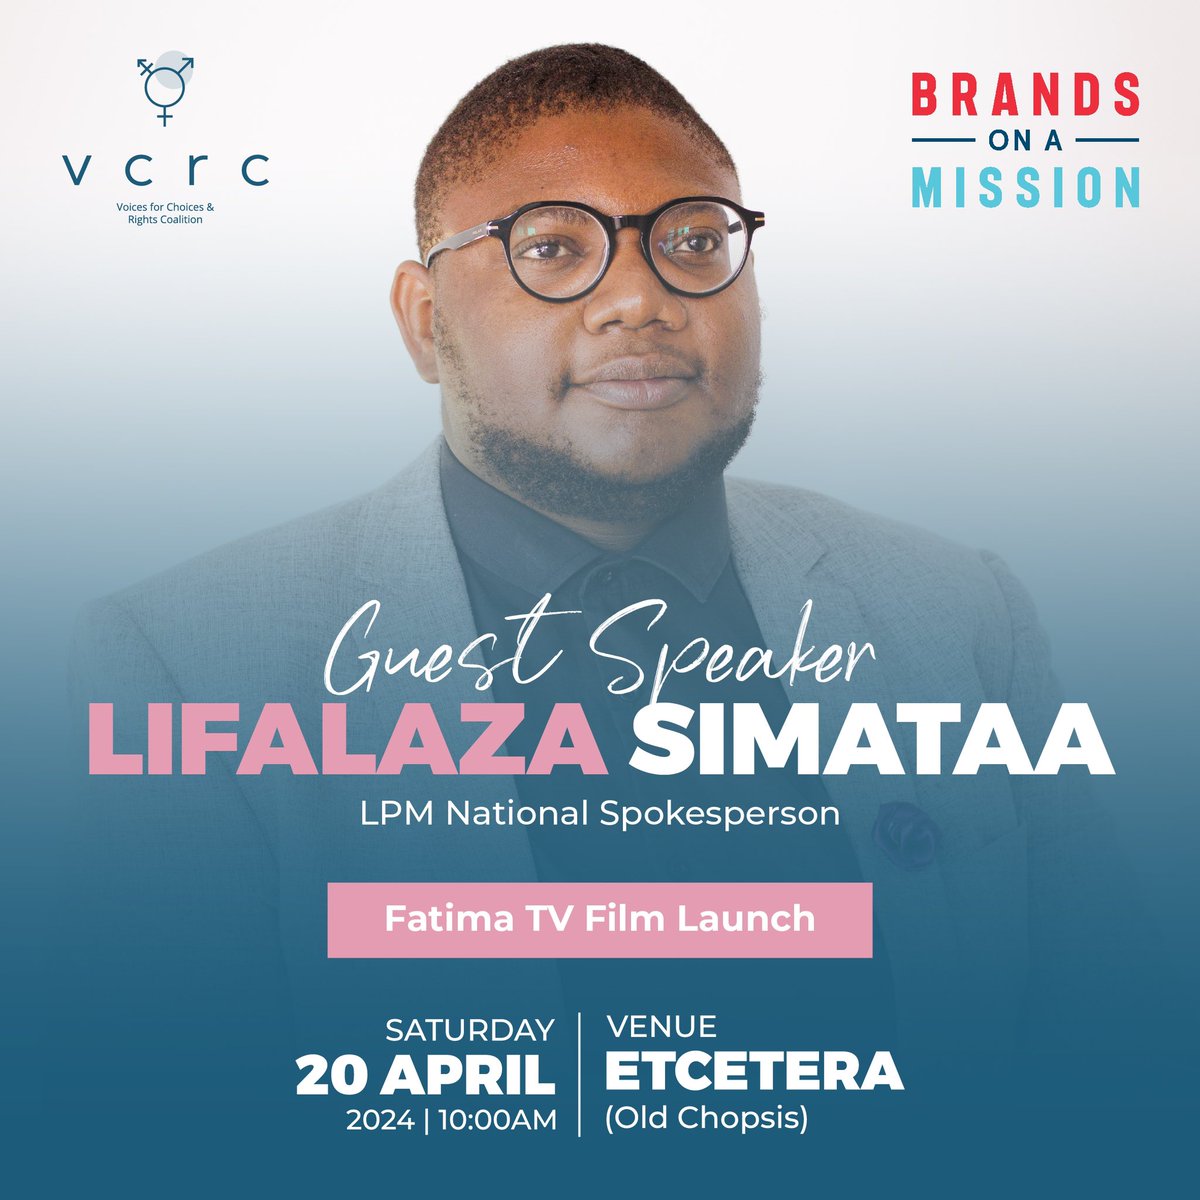 📣FATIMA TV FILM LAUNCH📣 LPM NATIONAL SPOKESPERSON. ETHICIST. COMEDIAN, Lifalaza Simataa, is a GUEST SPEAKER at the launch this Saturday. Have you registered yet? Register to attend via this link: forms.gle/oMDBYZbEByFx5A…. #FatimaTV #FilmLaunch #VCRC #BOAM